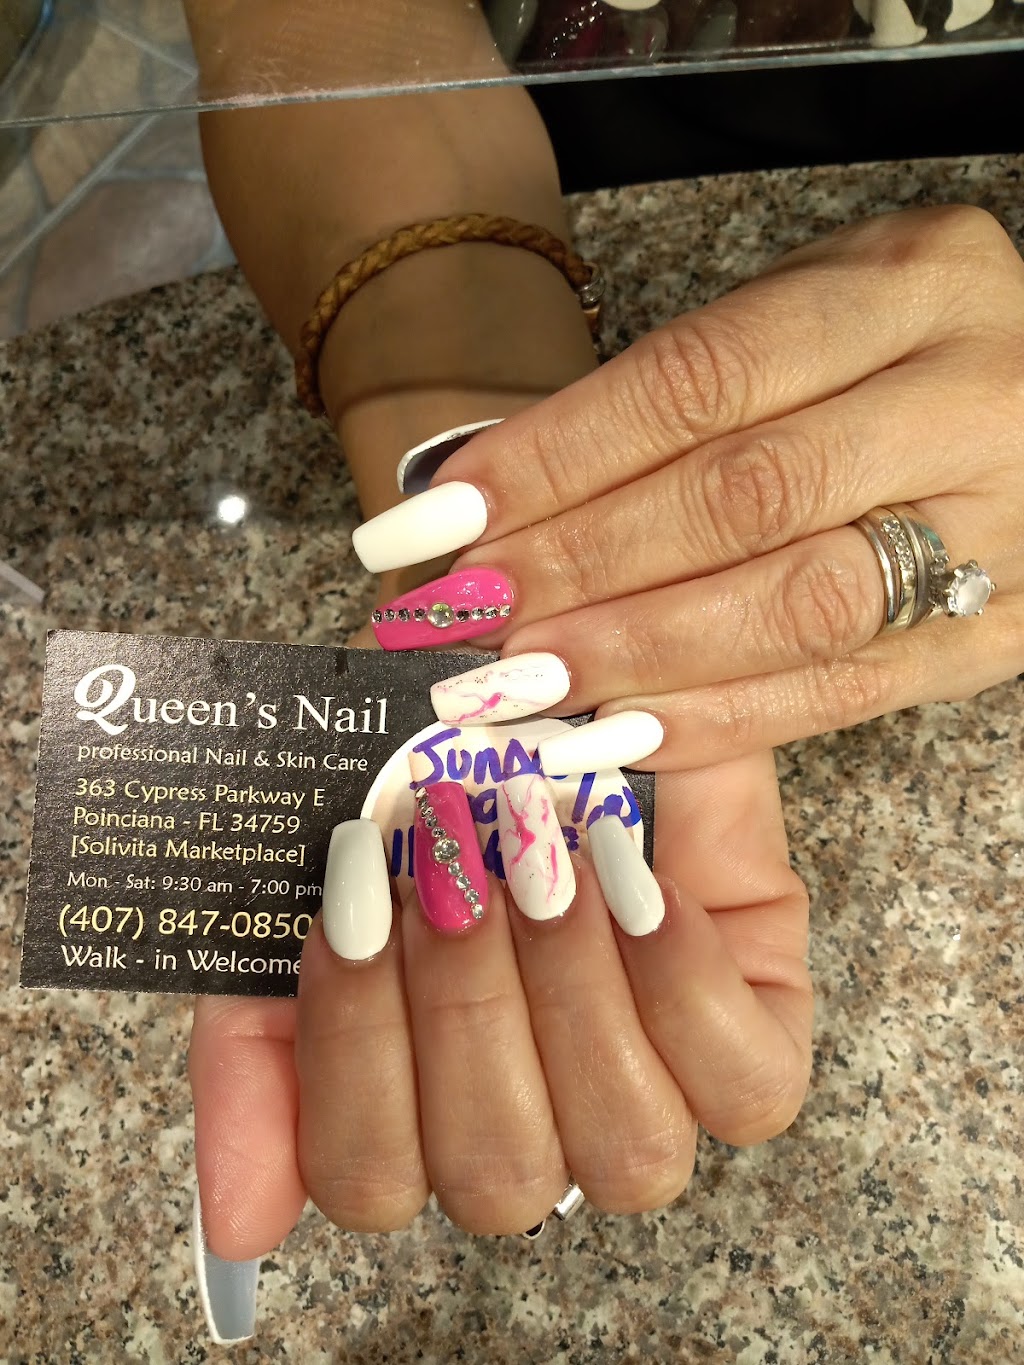 Queens Nails | 363 Cypress Pkwy, Poinciana, FL 34759 | Phone: (407) 847-0850